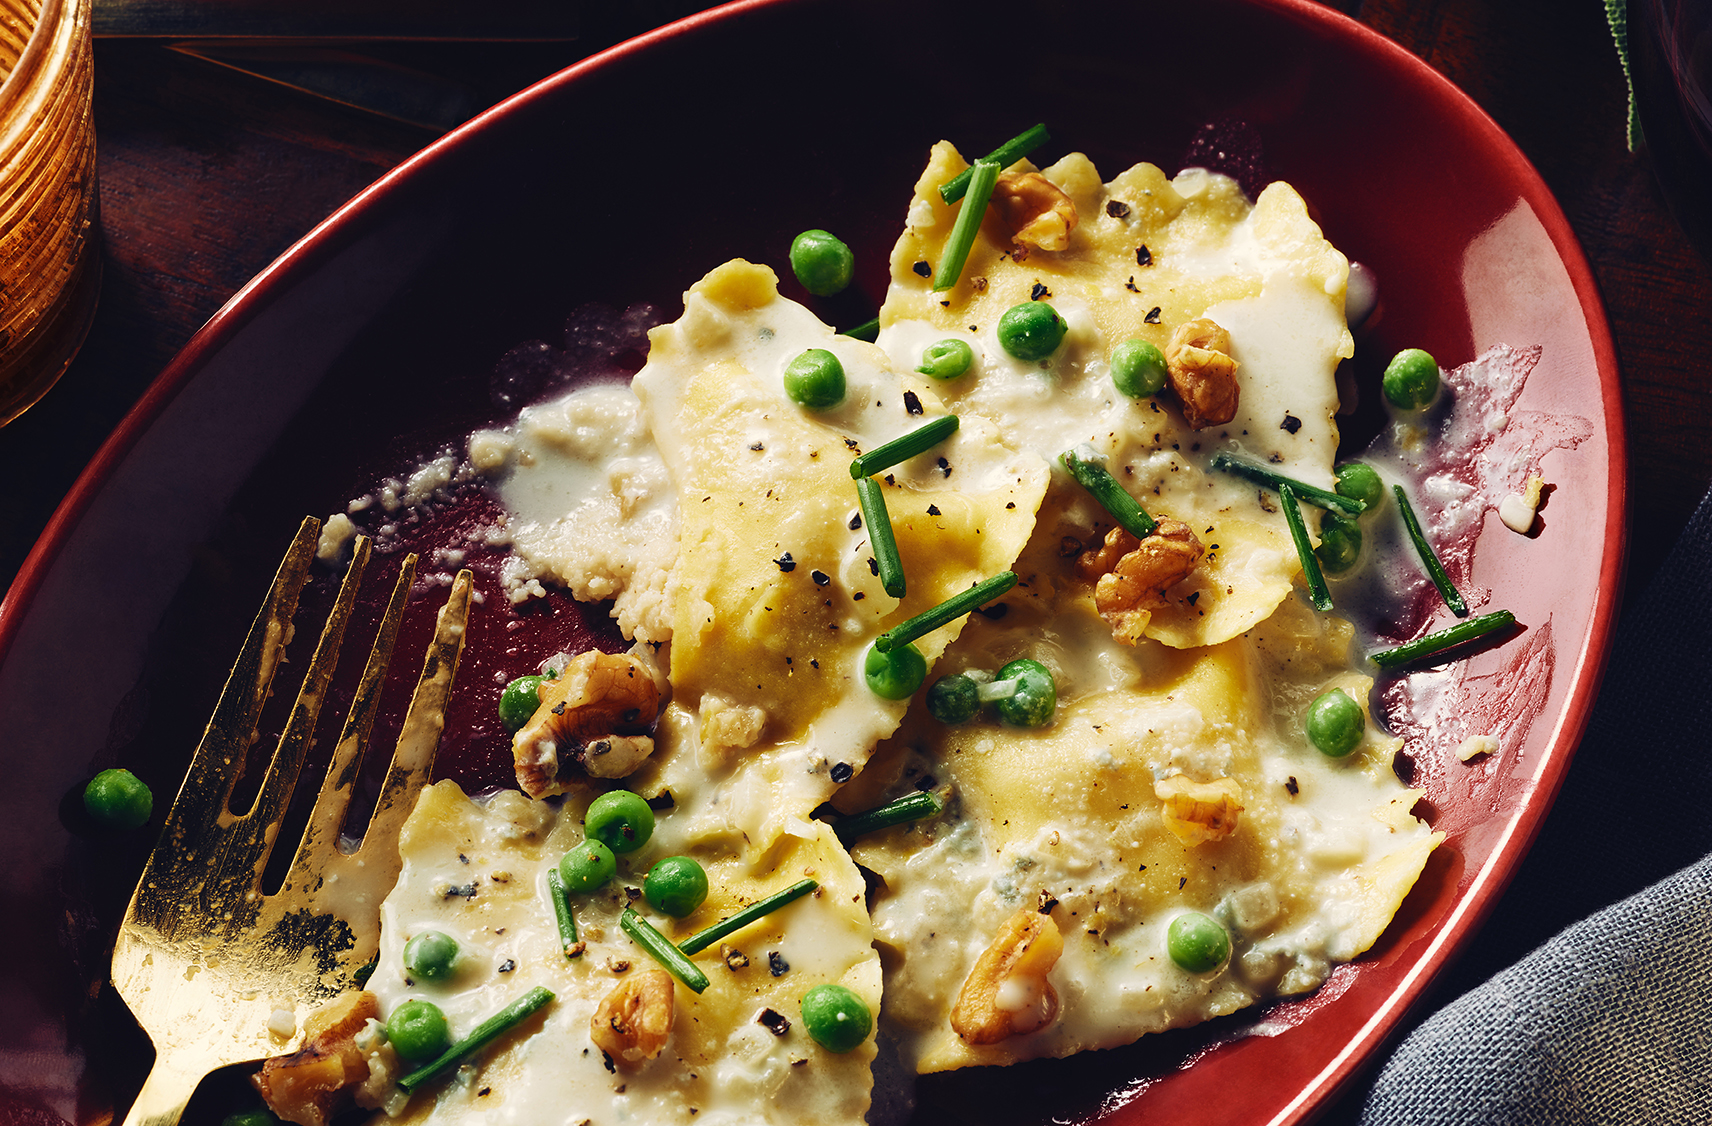 Cauliflower-stuffed pasta in a cream sauce topped with green peas and chive
